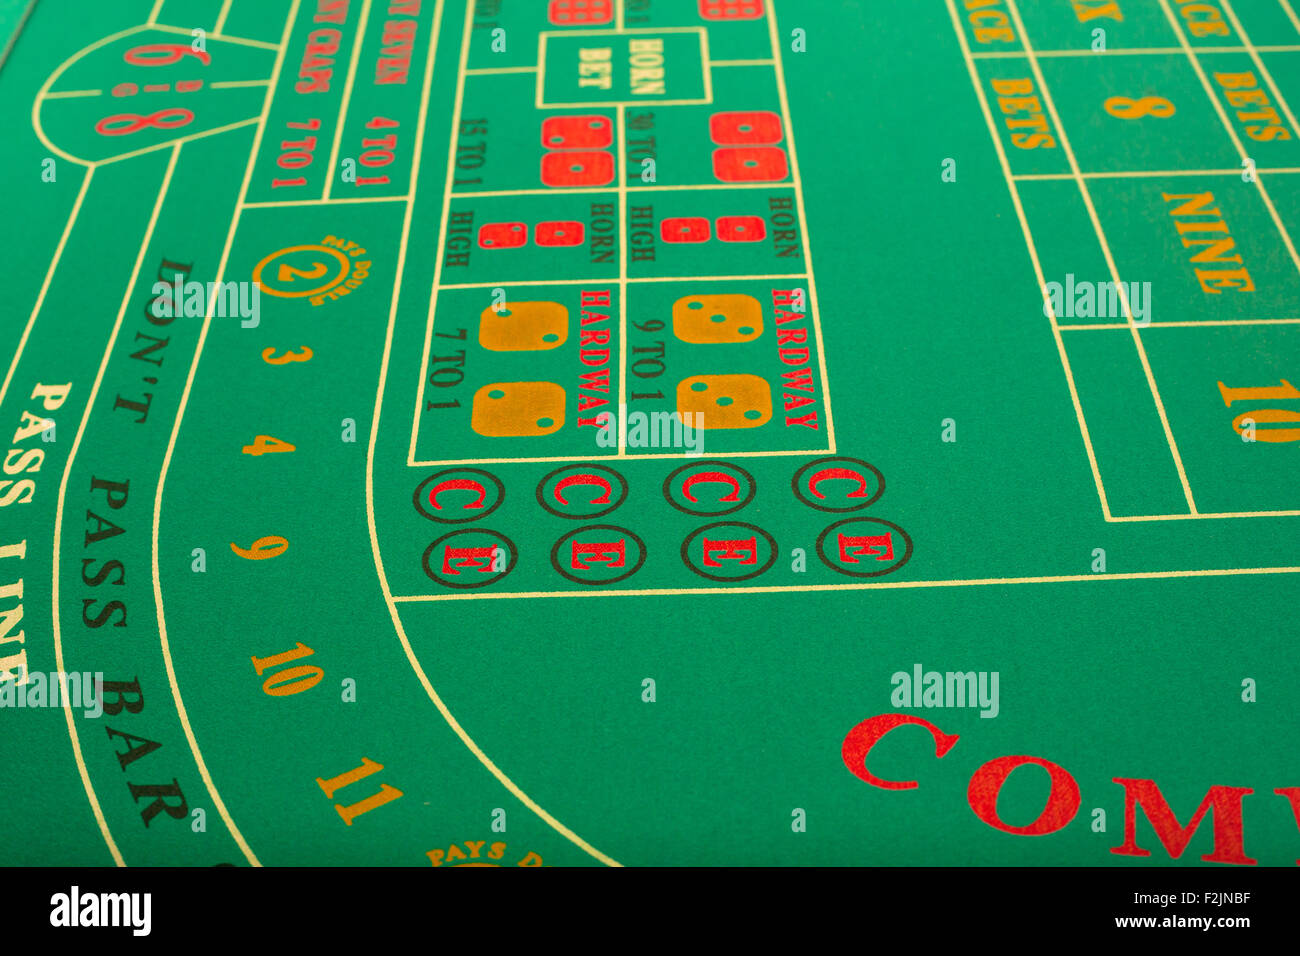 TRIESTE, ITALY - OCTOBER, 10: View of baccarat table on October 10, 2014 Stock Photo